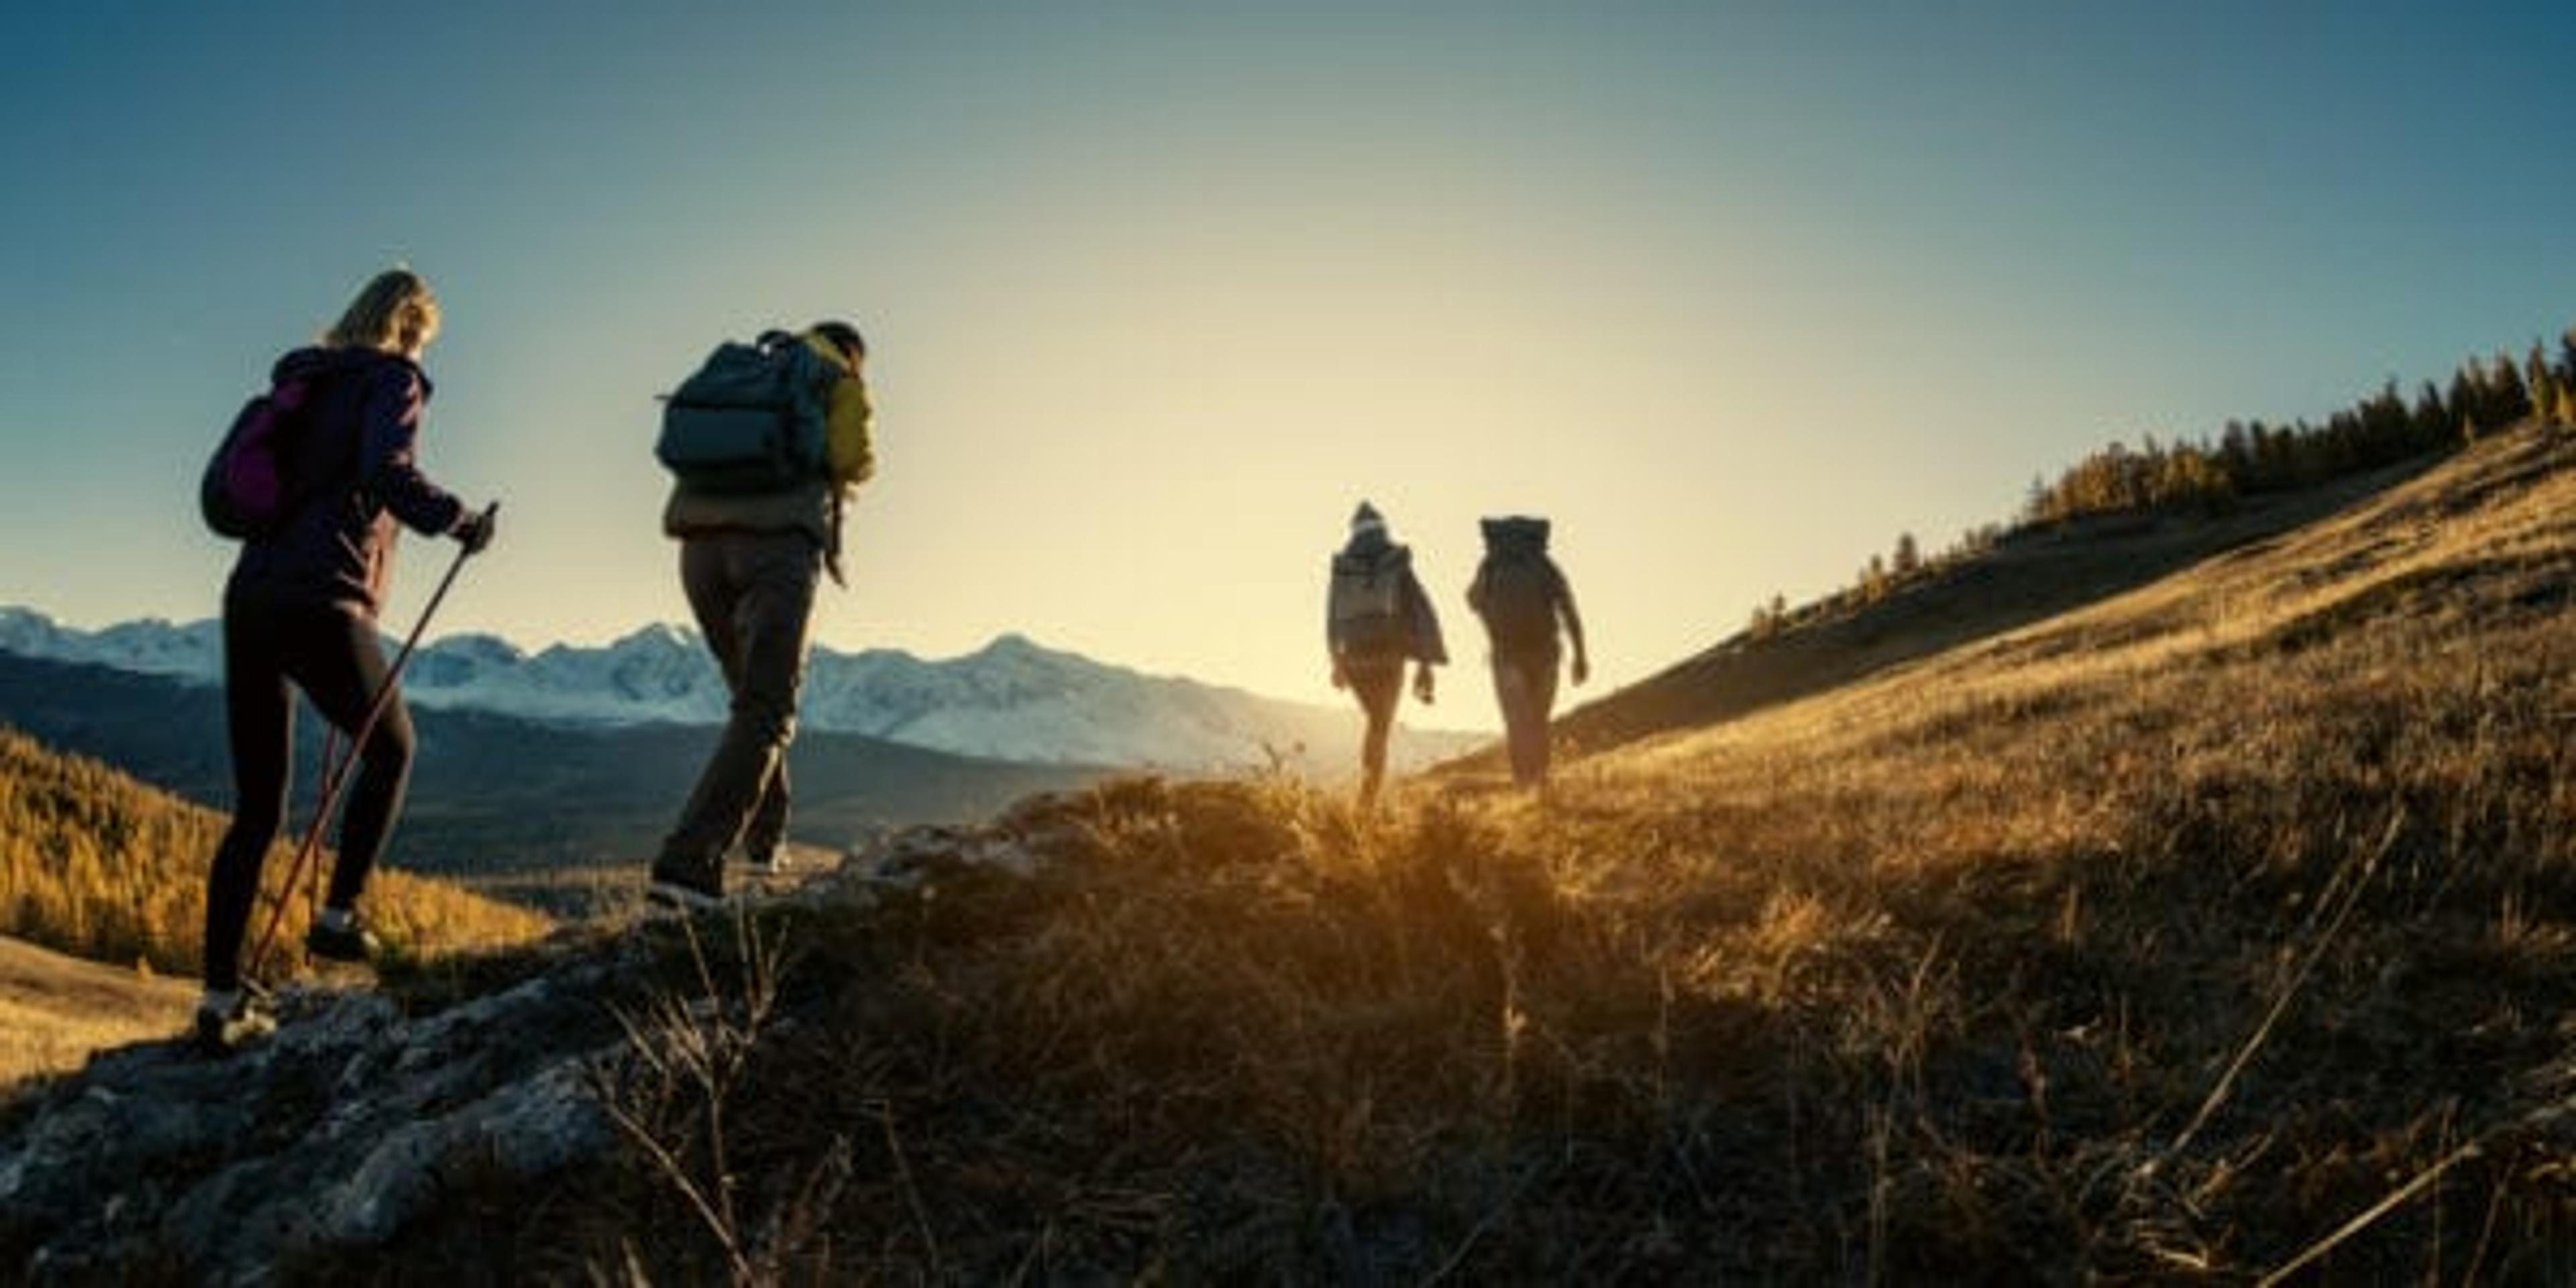 Group of young hikers walks in mountains at sunset time